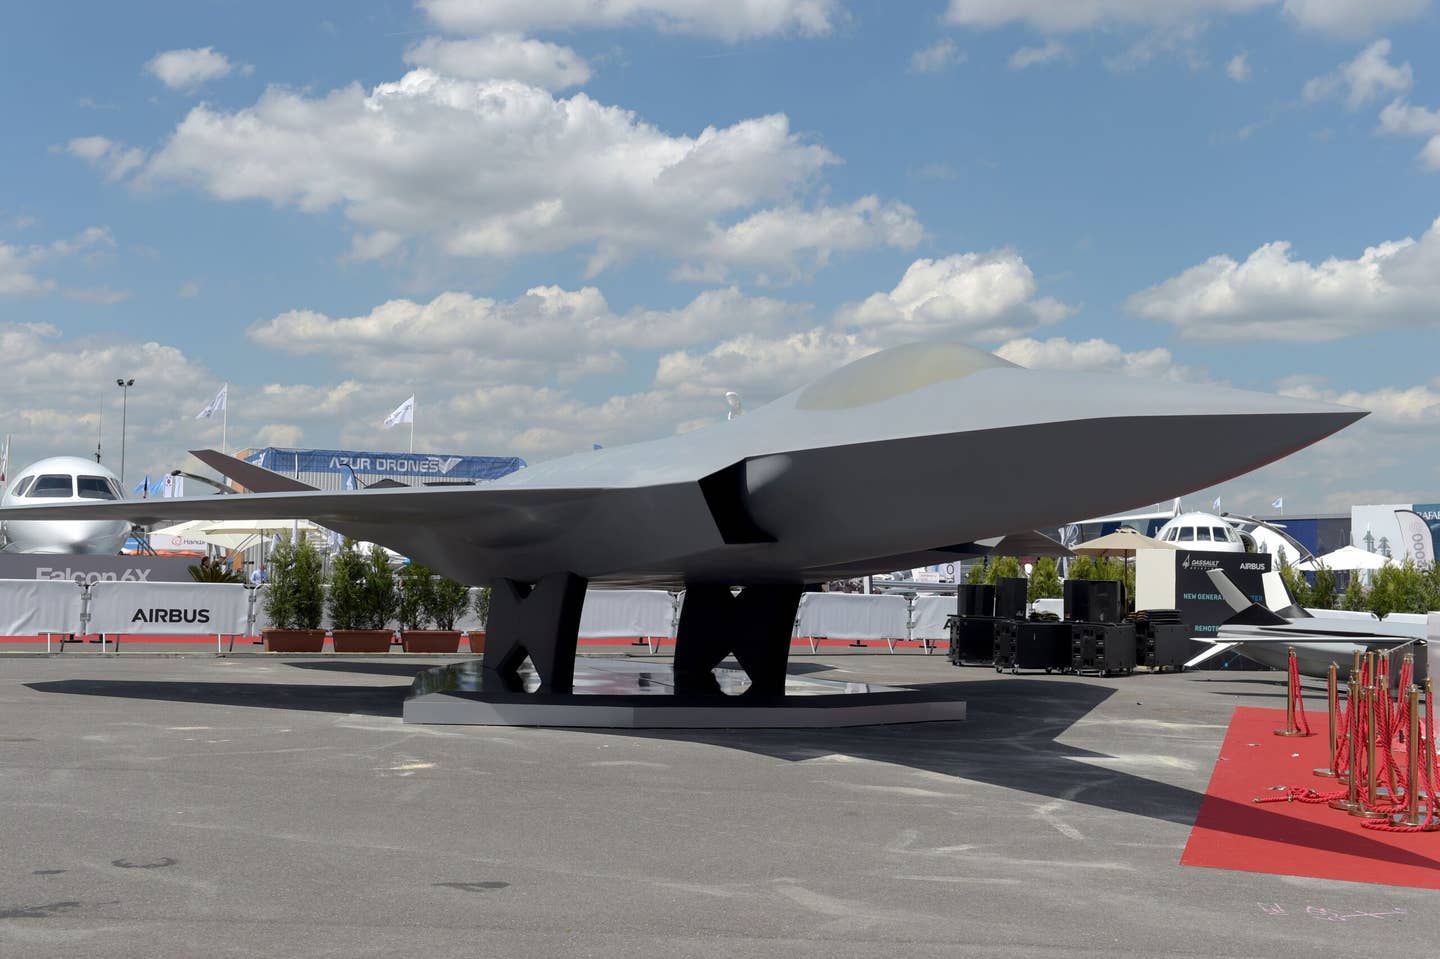 The full-scale model of the NGF, as part of the Future Combat Air System, was presented by Dassault Aviation on the first day of the 2019 Paris Air Show at Le Bourget Airport. <em>ERIC PIERMONT/AFP via Getty Images</em>